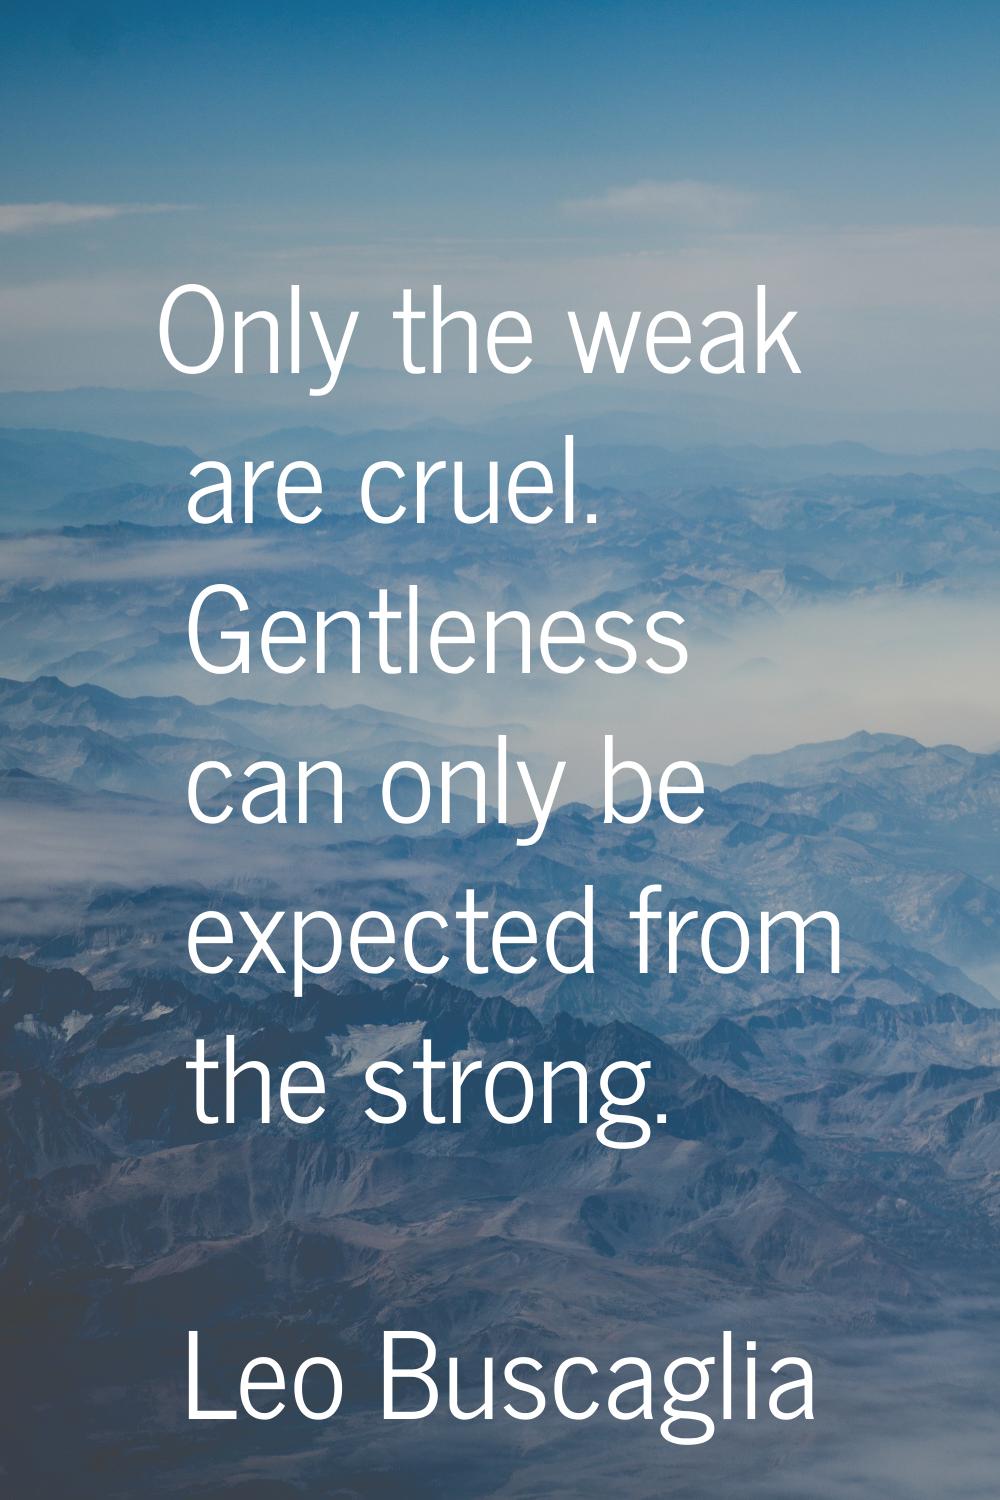 Only the weak are cruel. Gentleness can only be expected from the strong.